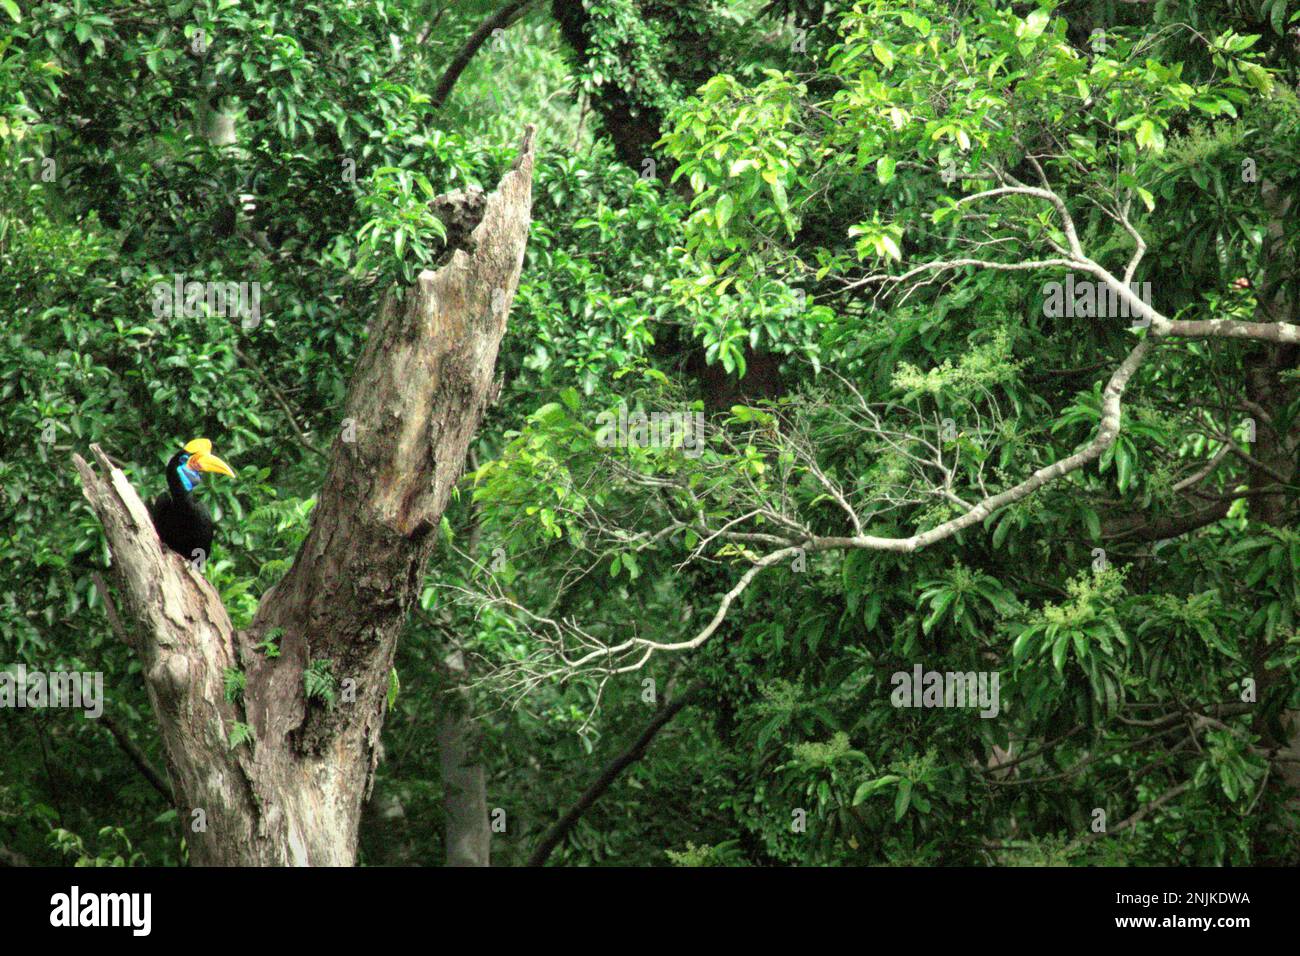 A female individual of knobbed hornbill, or sometimes called Sulawesi wrinkled hornbill (Rhyticeros cassidix), is perching on a dead tree in rainforest near Mount Tangkoko and DuaSudara in Bitung, North Sulawesi, Indonesia. Due to their dependency on forest and certain types of trees, hornbills in general are threatened by climate change. 'There is rapidly growing evidence for the negative effects of high temperatures on the behavior, physiology, breeding, and survival of various bird, mammal, and reptile species around the world,' said Dr. Nicholas Pattinson, a scientist. Stock Photo